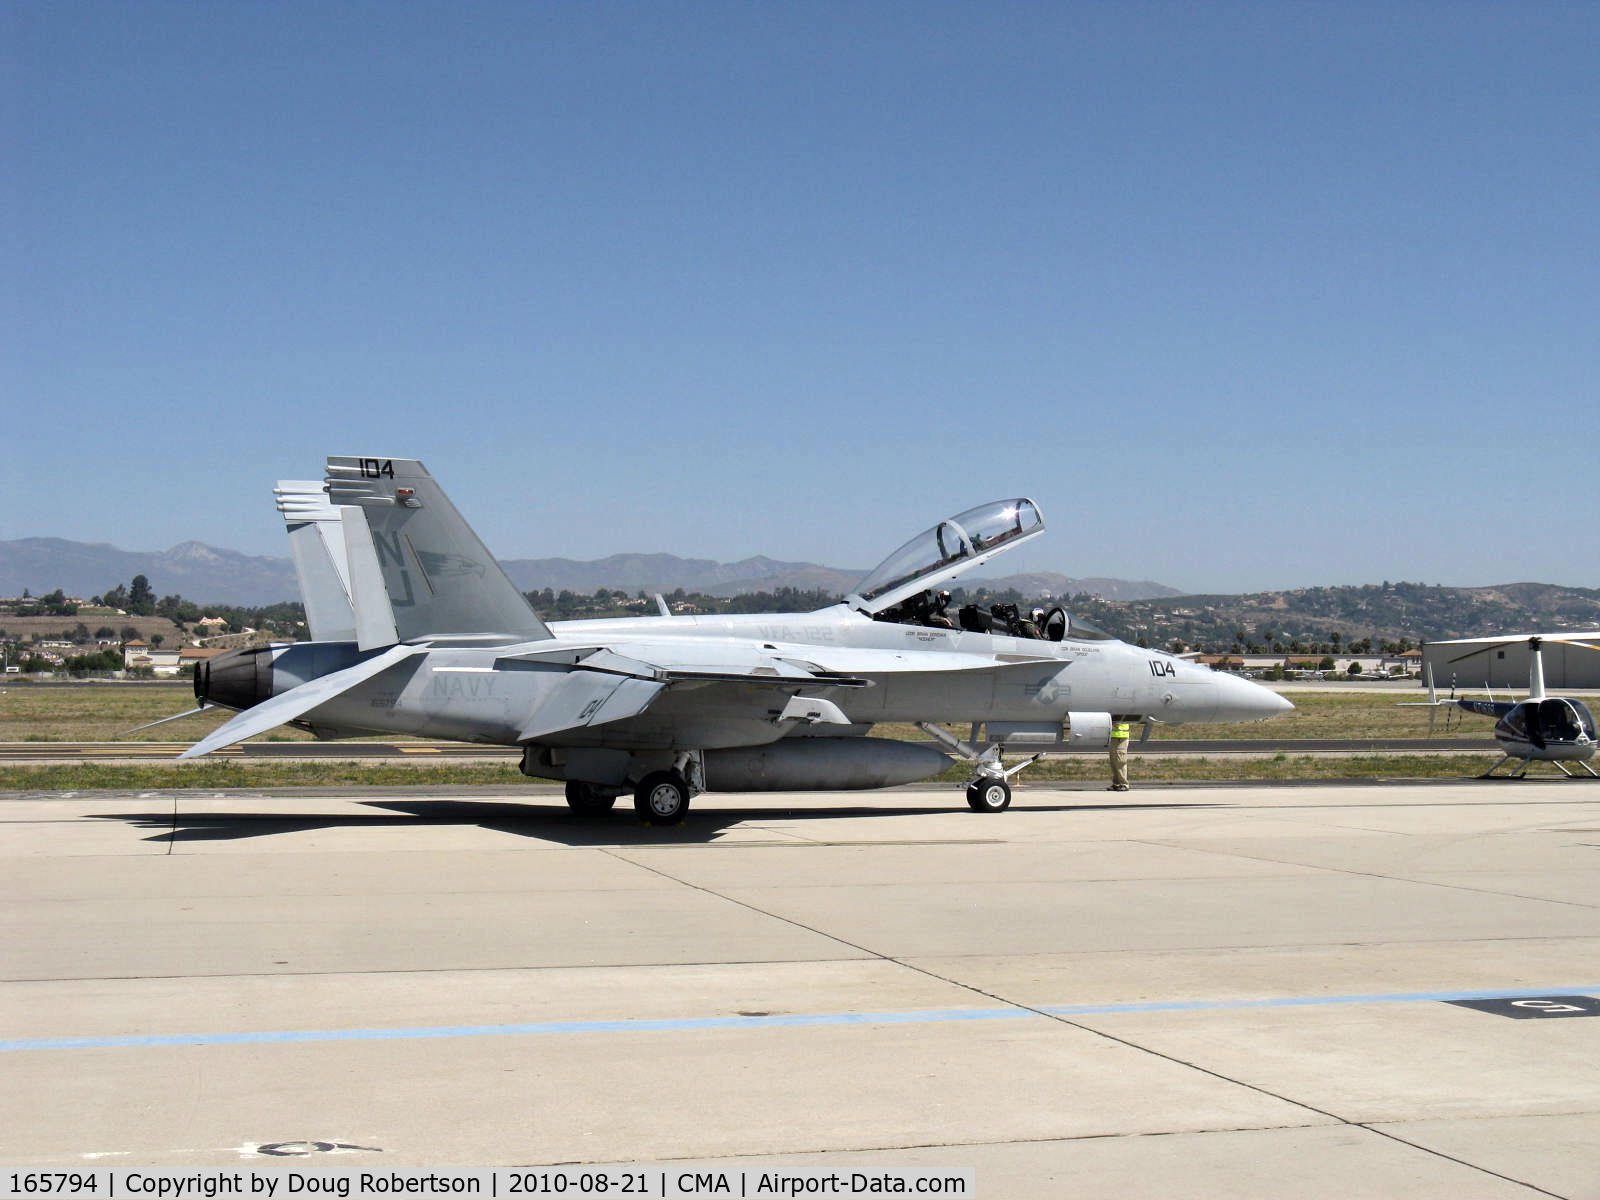 165794, Boeing F/A-18F Super Hornet C/N 1521/F020, Boeing F/A-18F SUPER HORNET, two General Electric F414-GE-400 Turbofans, 14,000 lbf each, 22,000 lbf each with afterburners, runup checks